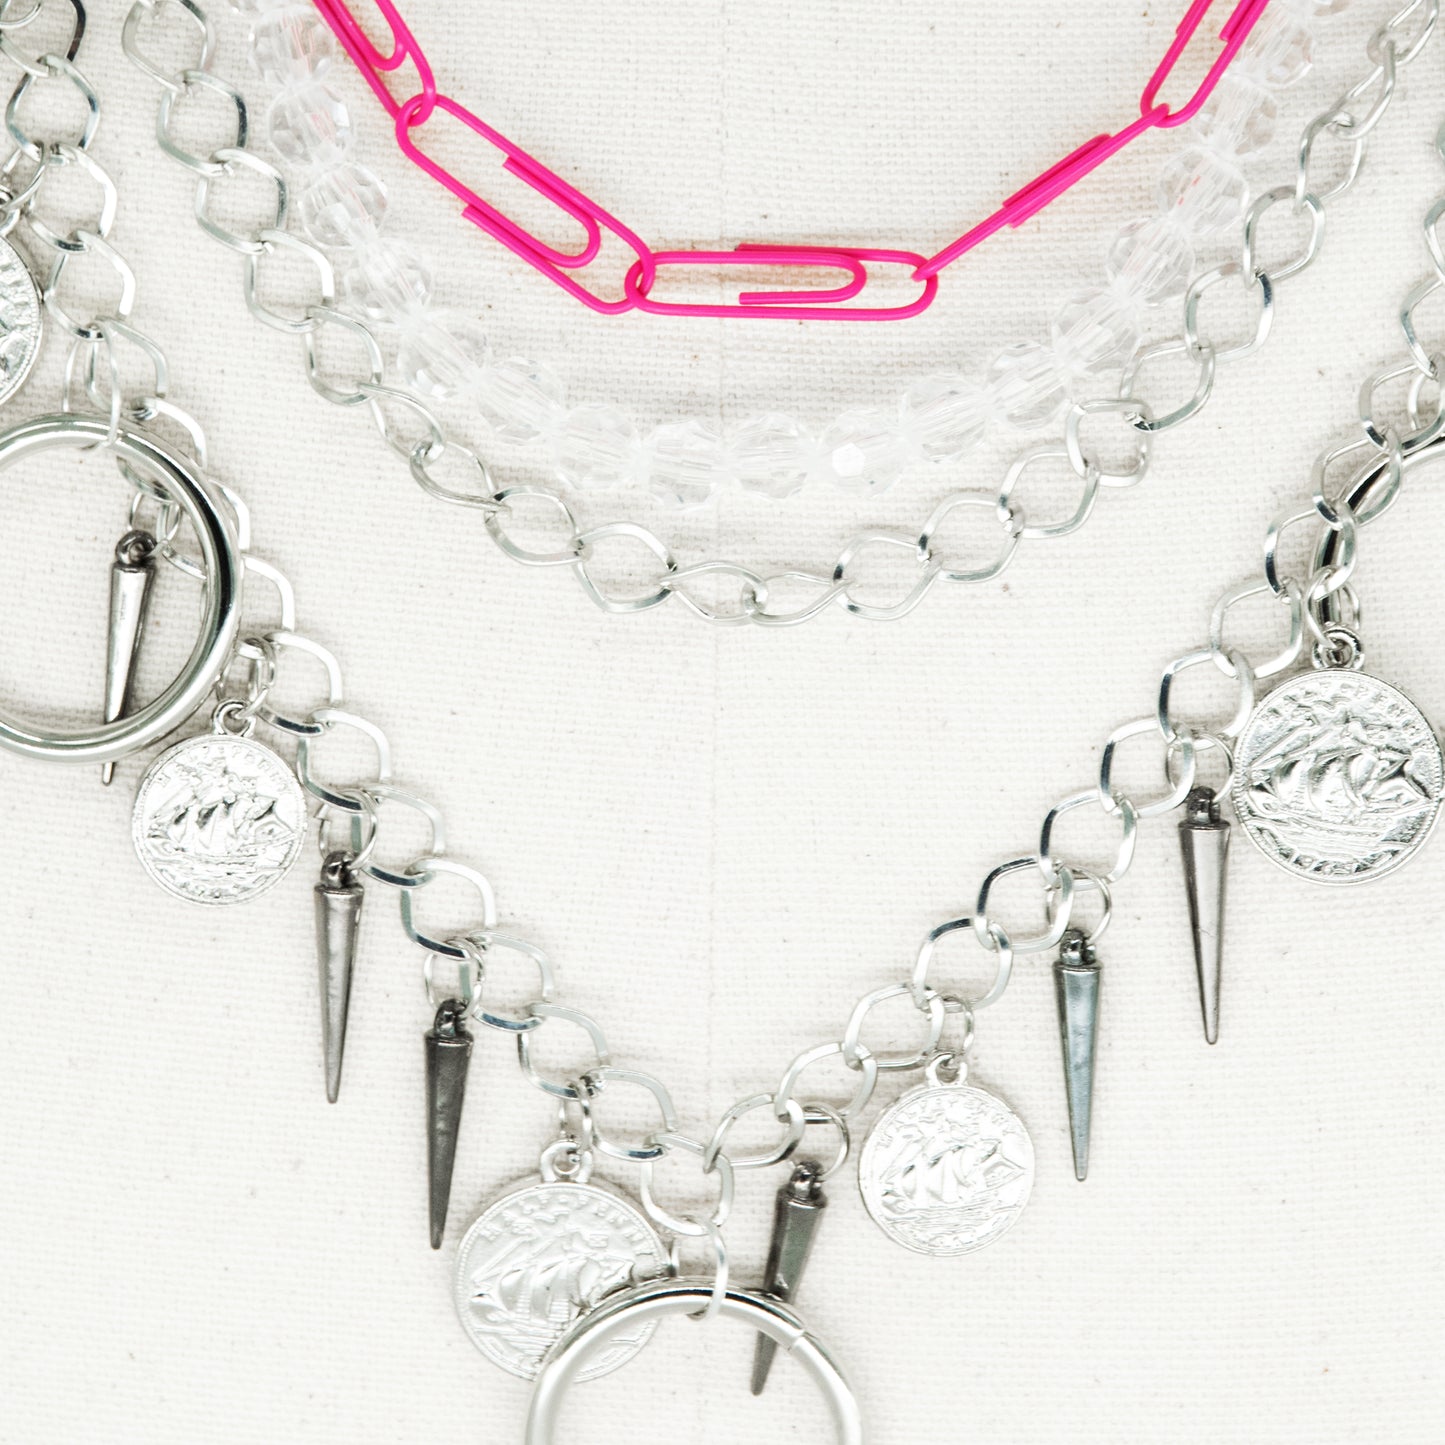 CHOKER SILVER AND PINK